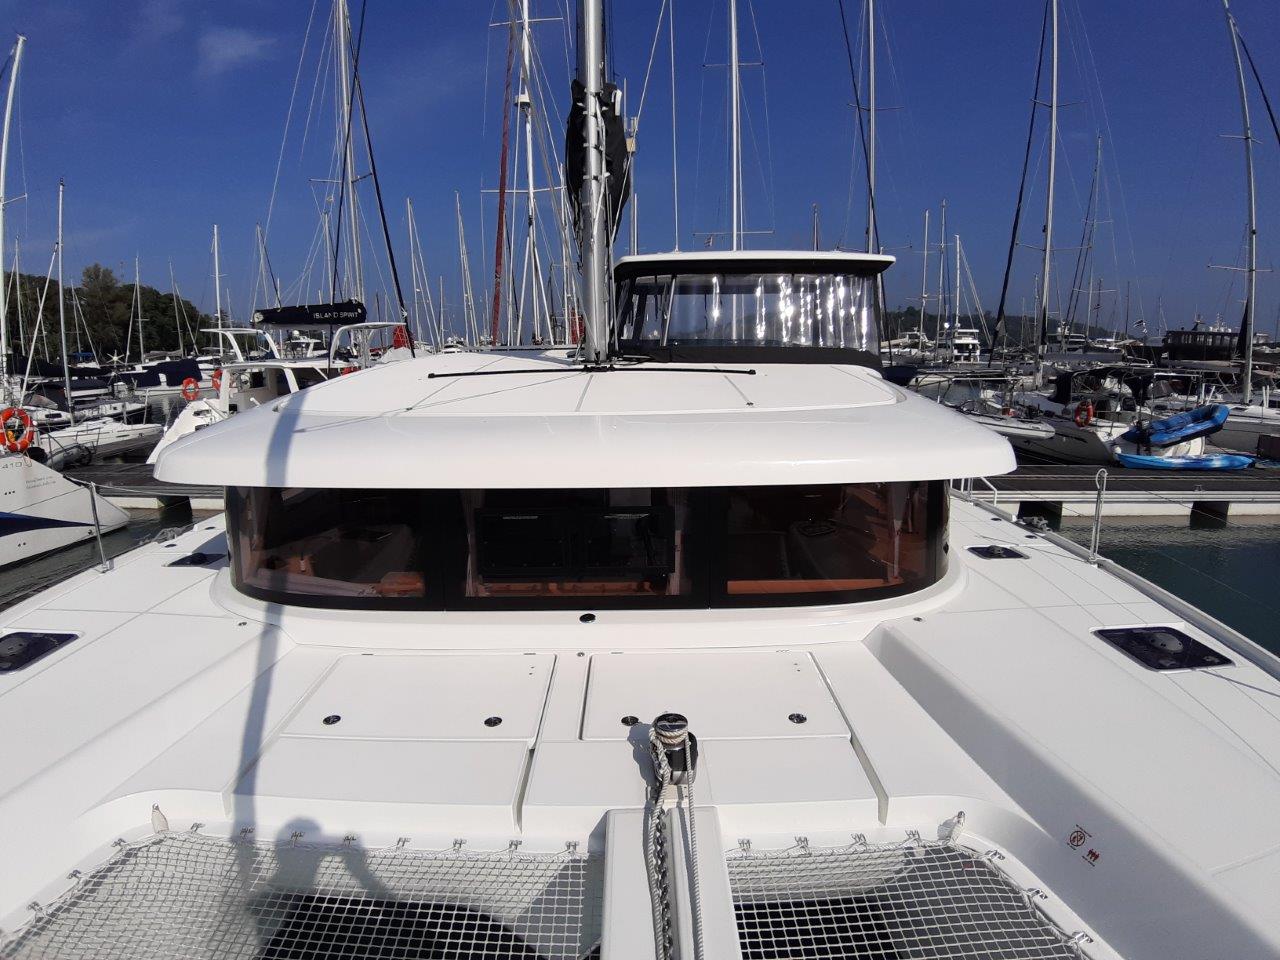 Lagoon 42 - Yacht Charter Queensland & Boat hire in Australia Queensland Whitsundays Coral Sea Marina 2